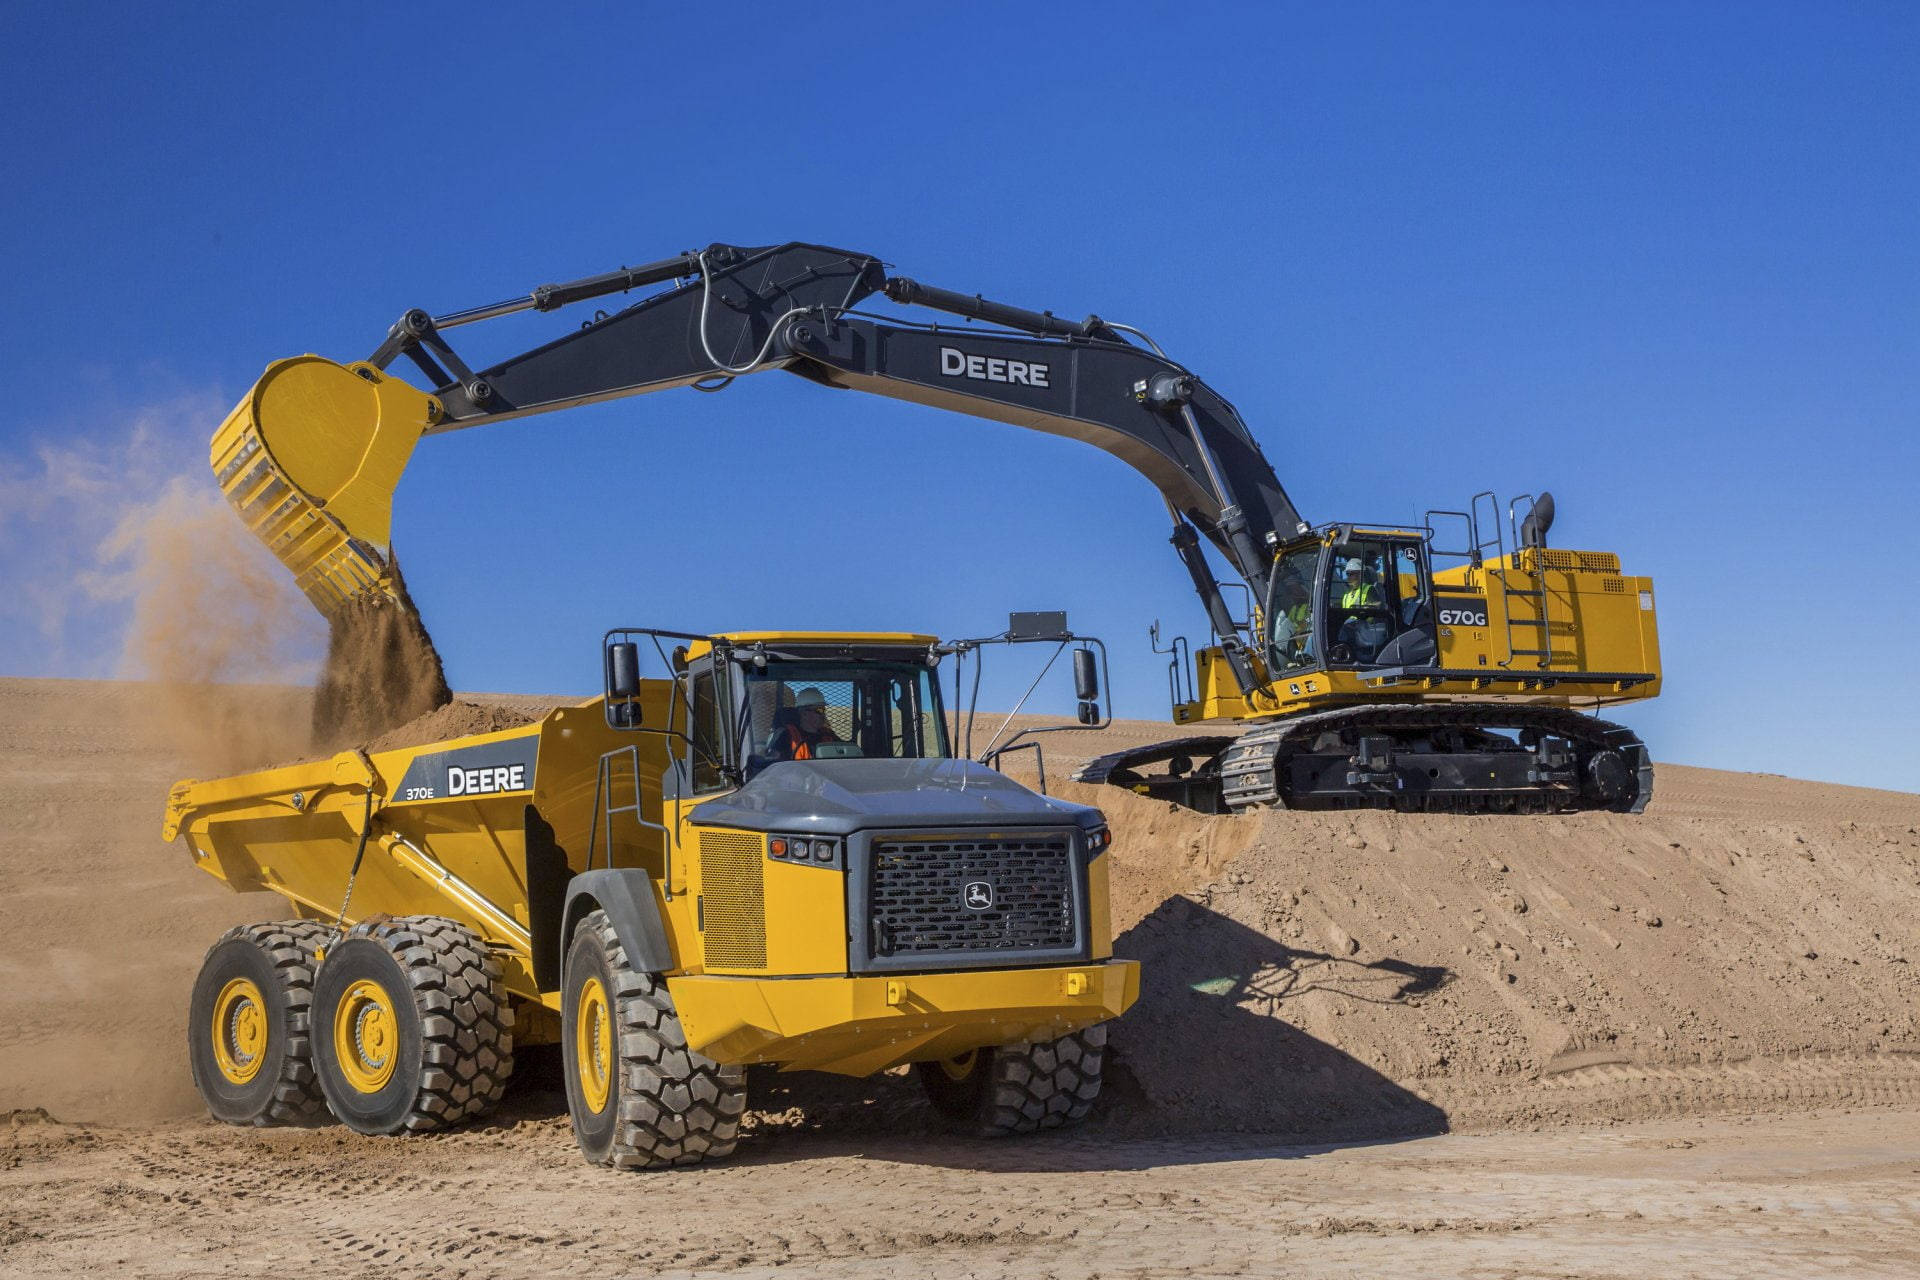 A Powerful John Deere Dump Truck And Excavator Working On A Construction Site